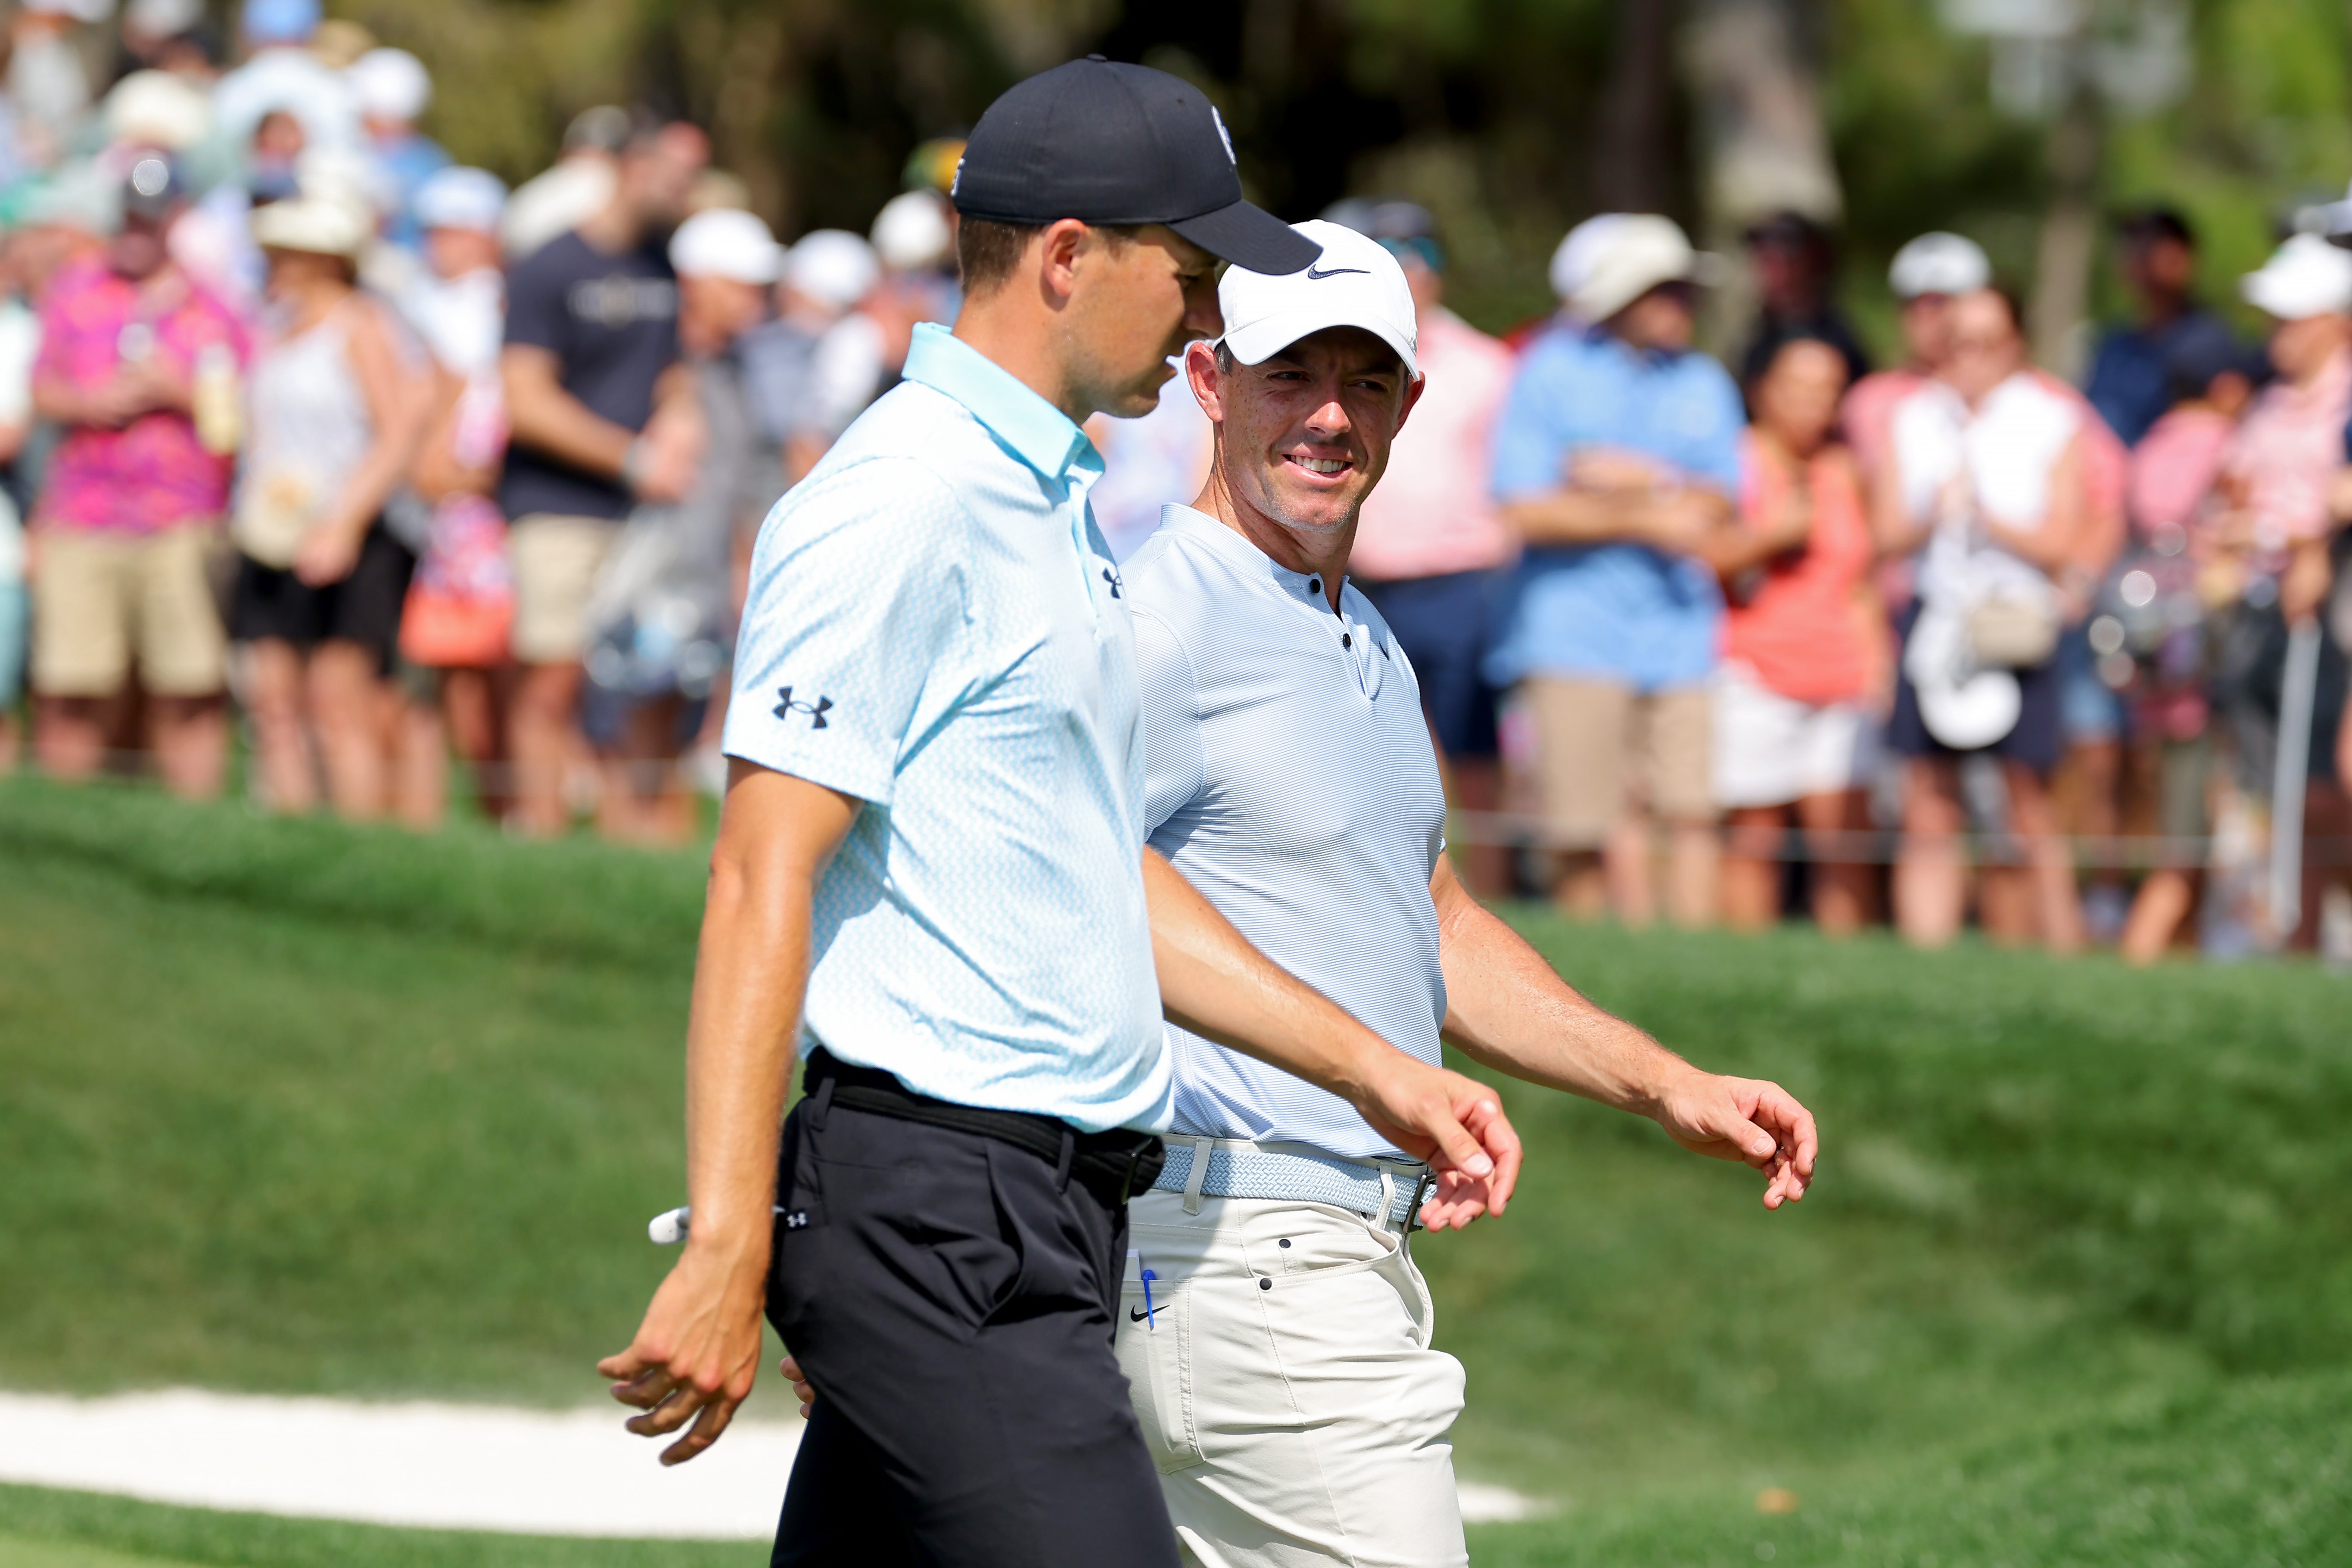 Rory McIlroy and Jordan Spieth have disagreed over ongoing negotiations with the PIF